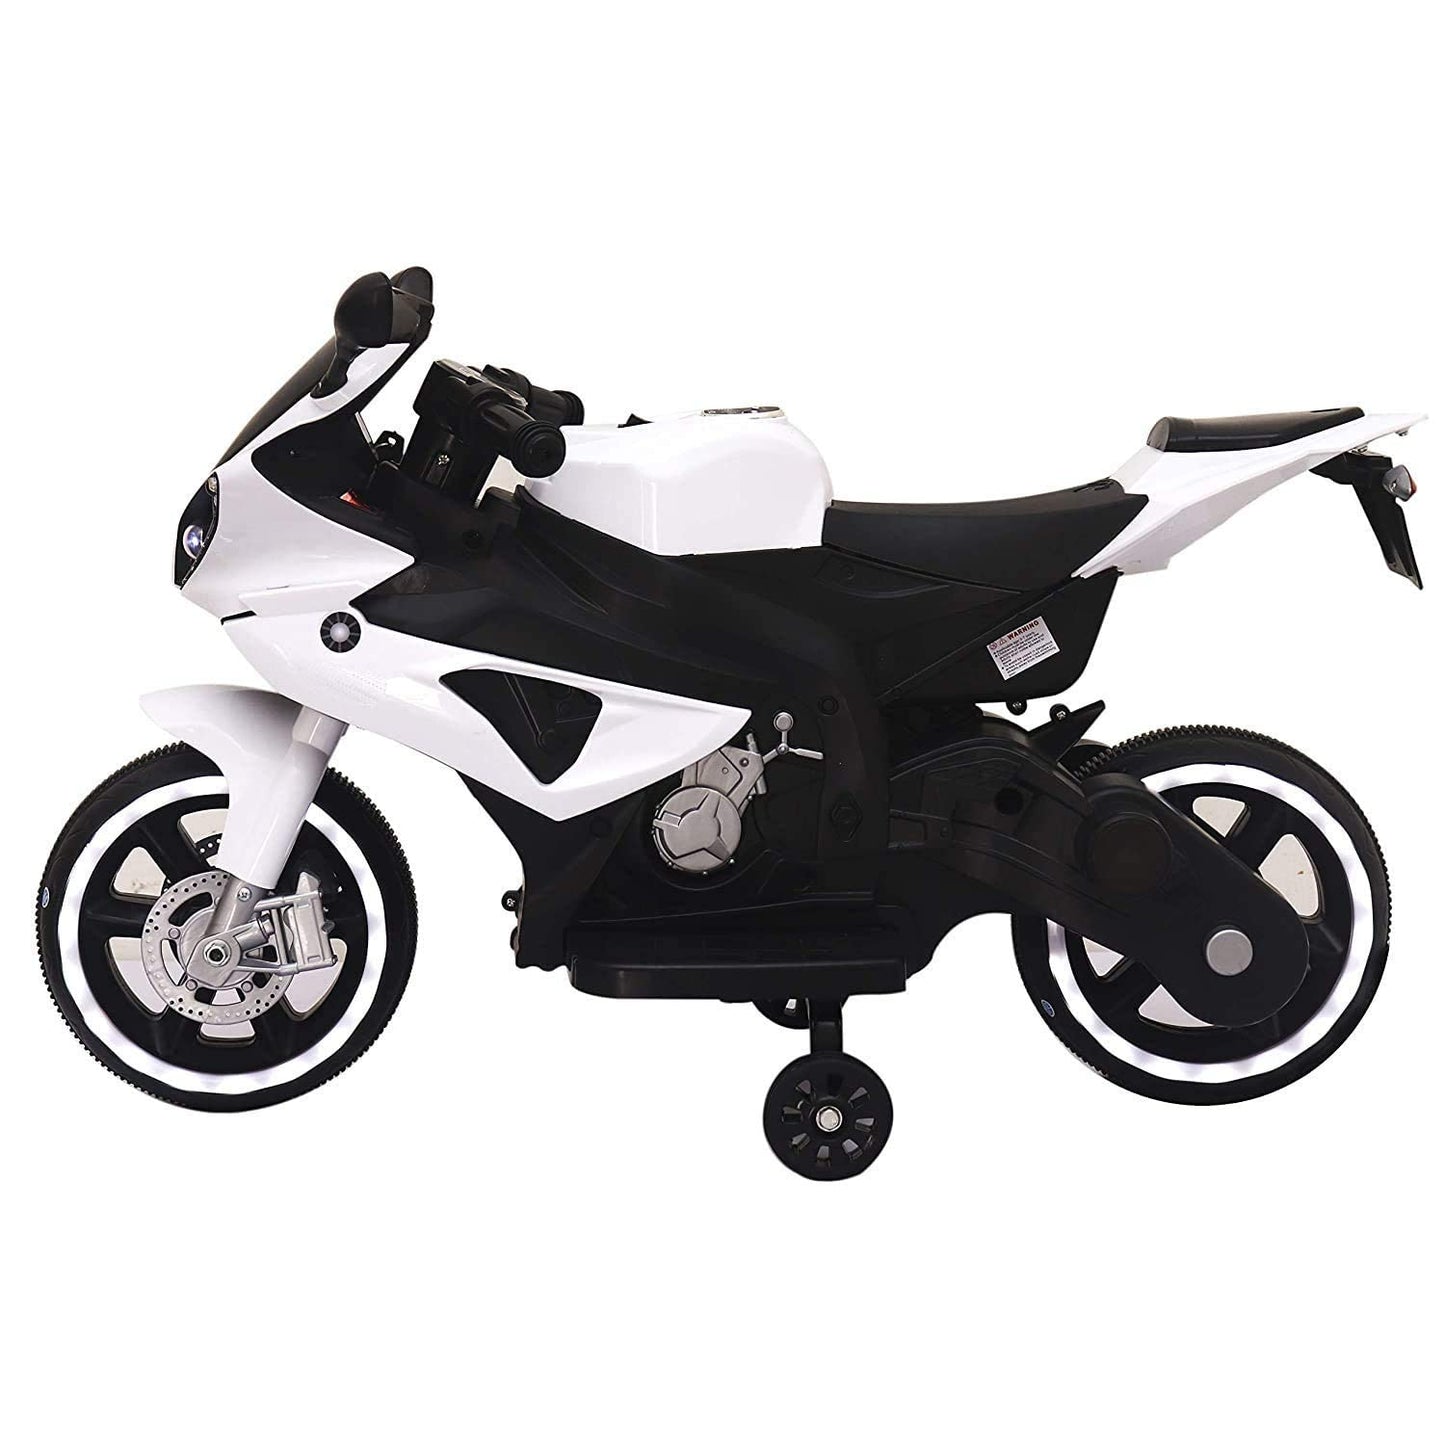 Letzride Kid's Blue R1 Ride-on Battery Bike, (1 to 2.5 Years) -White